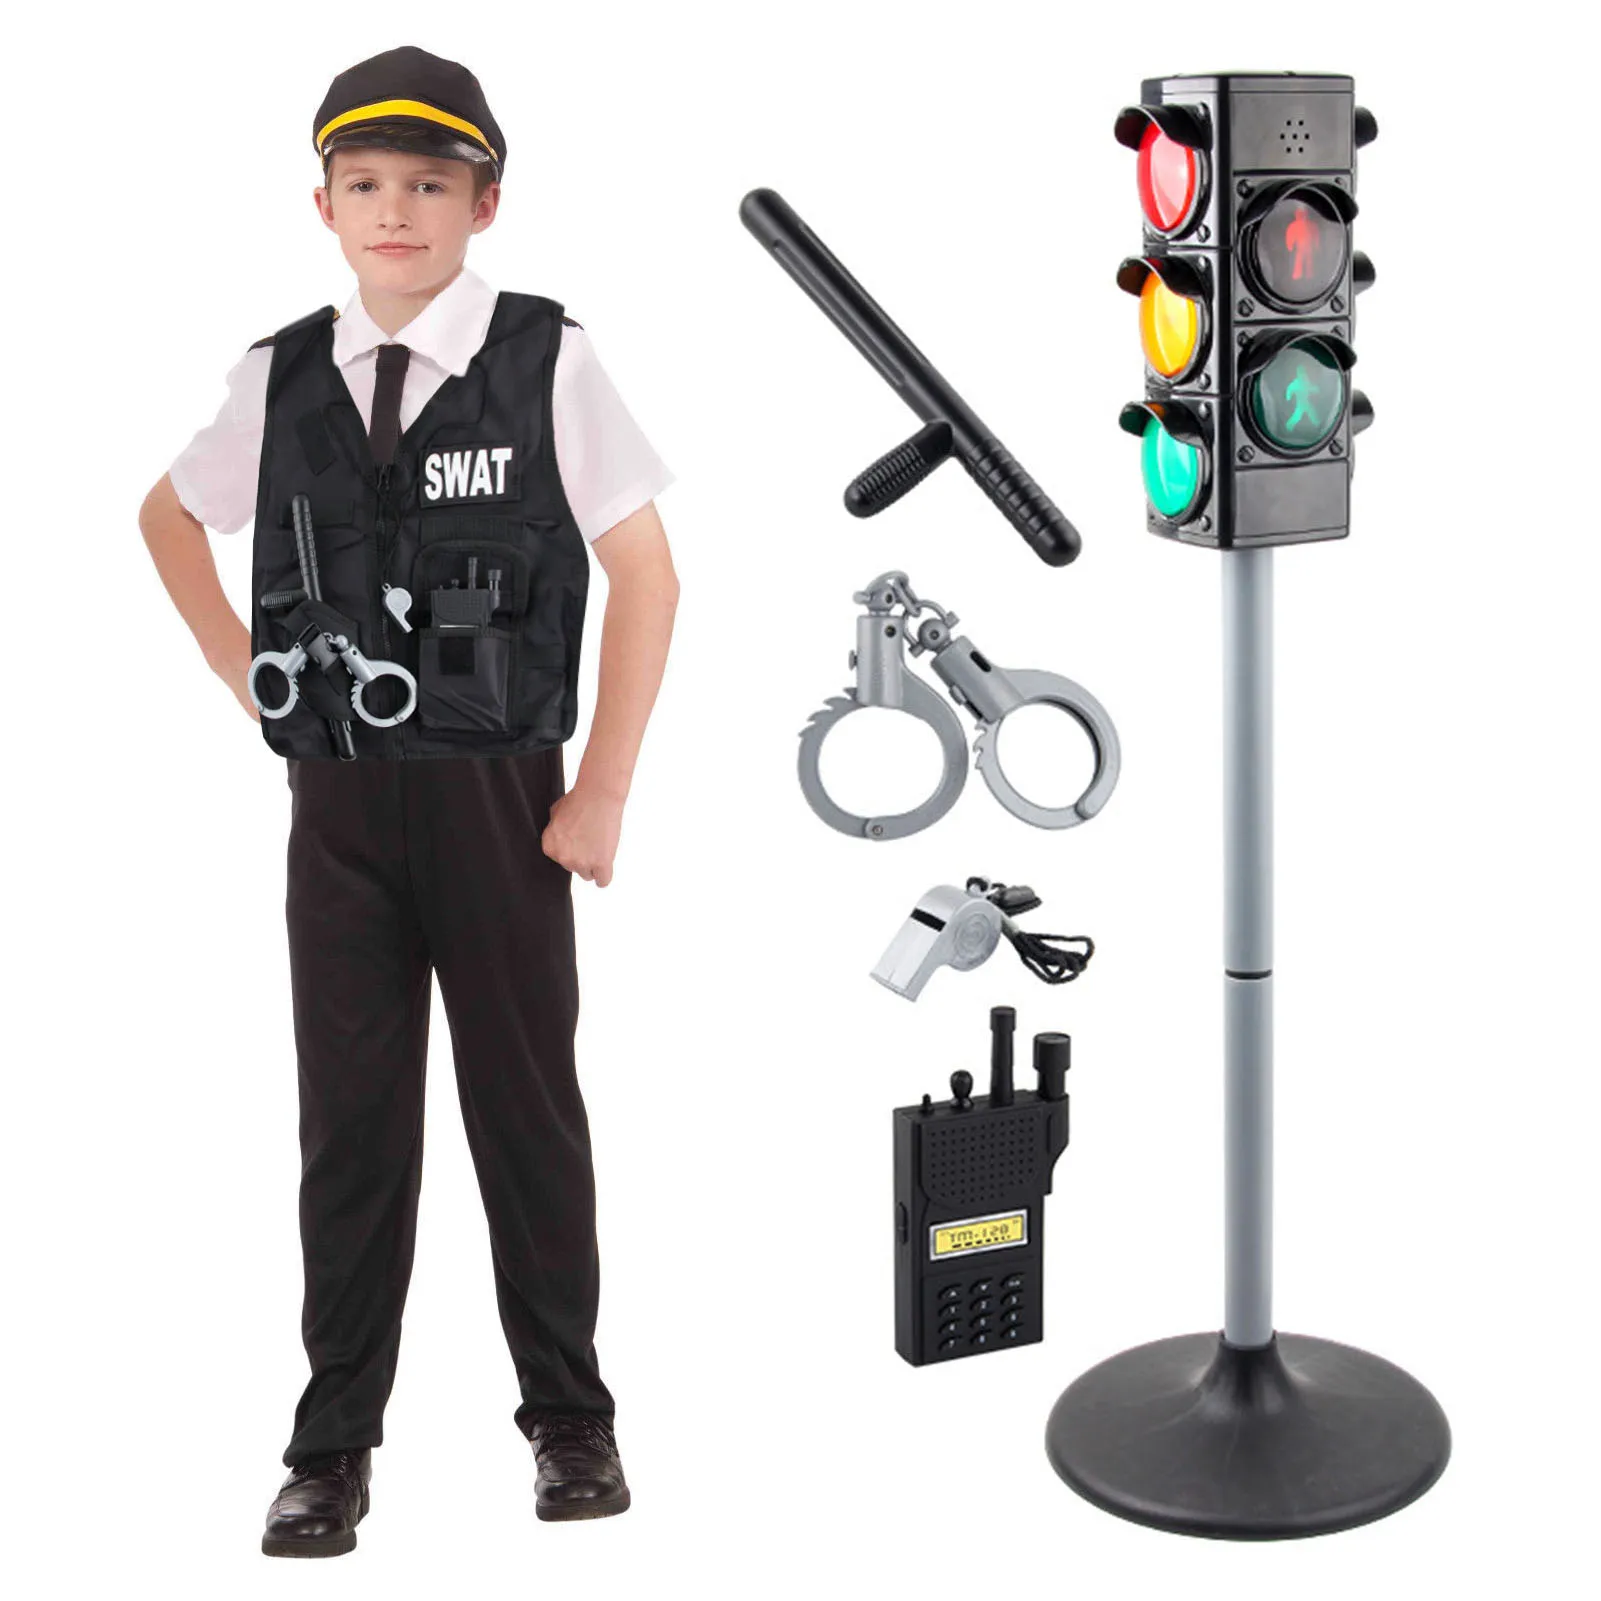 

Children Policeman Cosplay Costumes With Transportation Traffic Lights Early Education Teaching Aids Kids Role-playing Toy